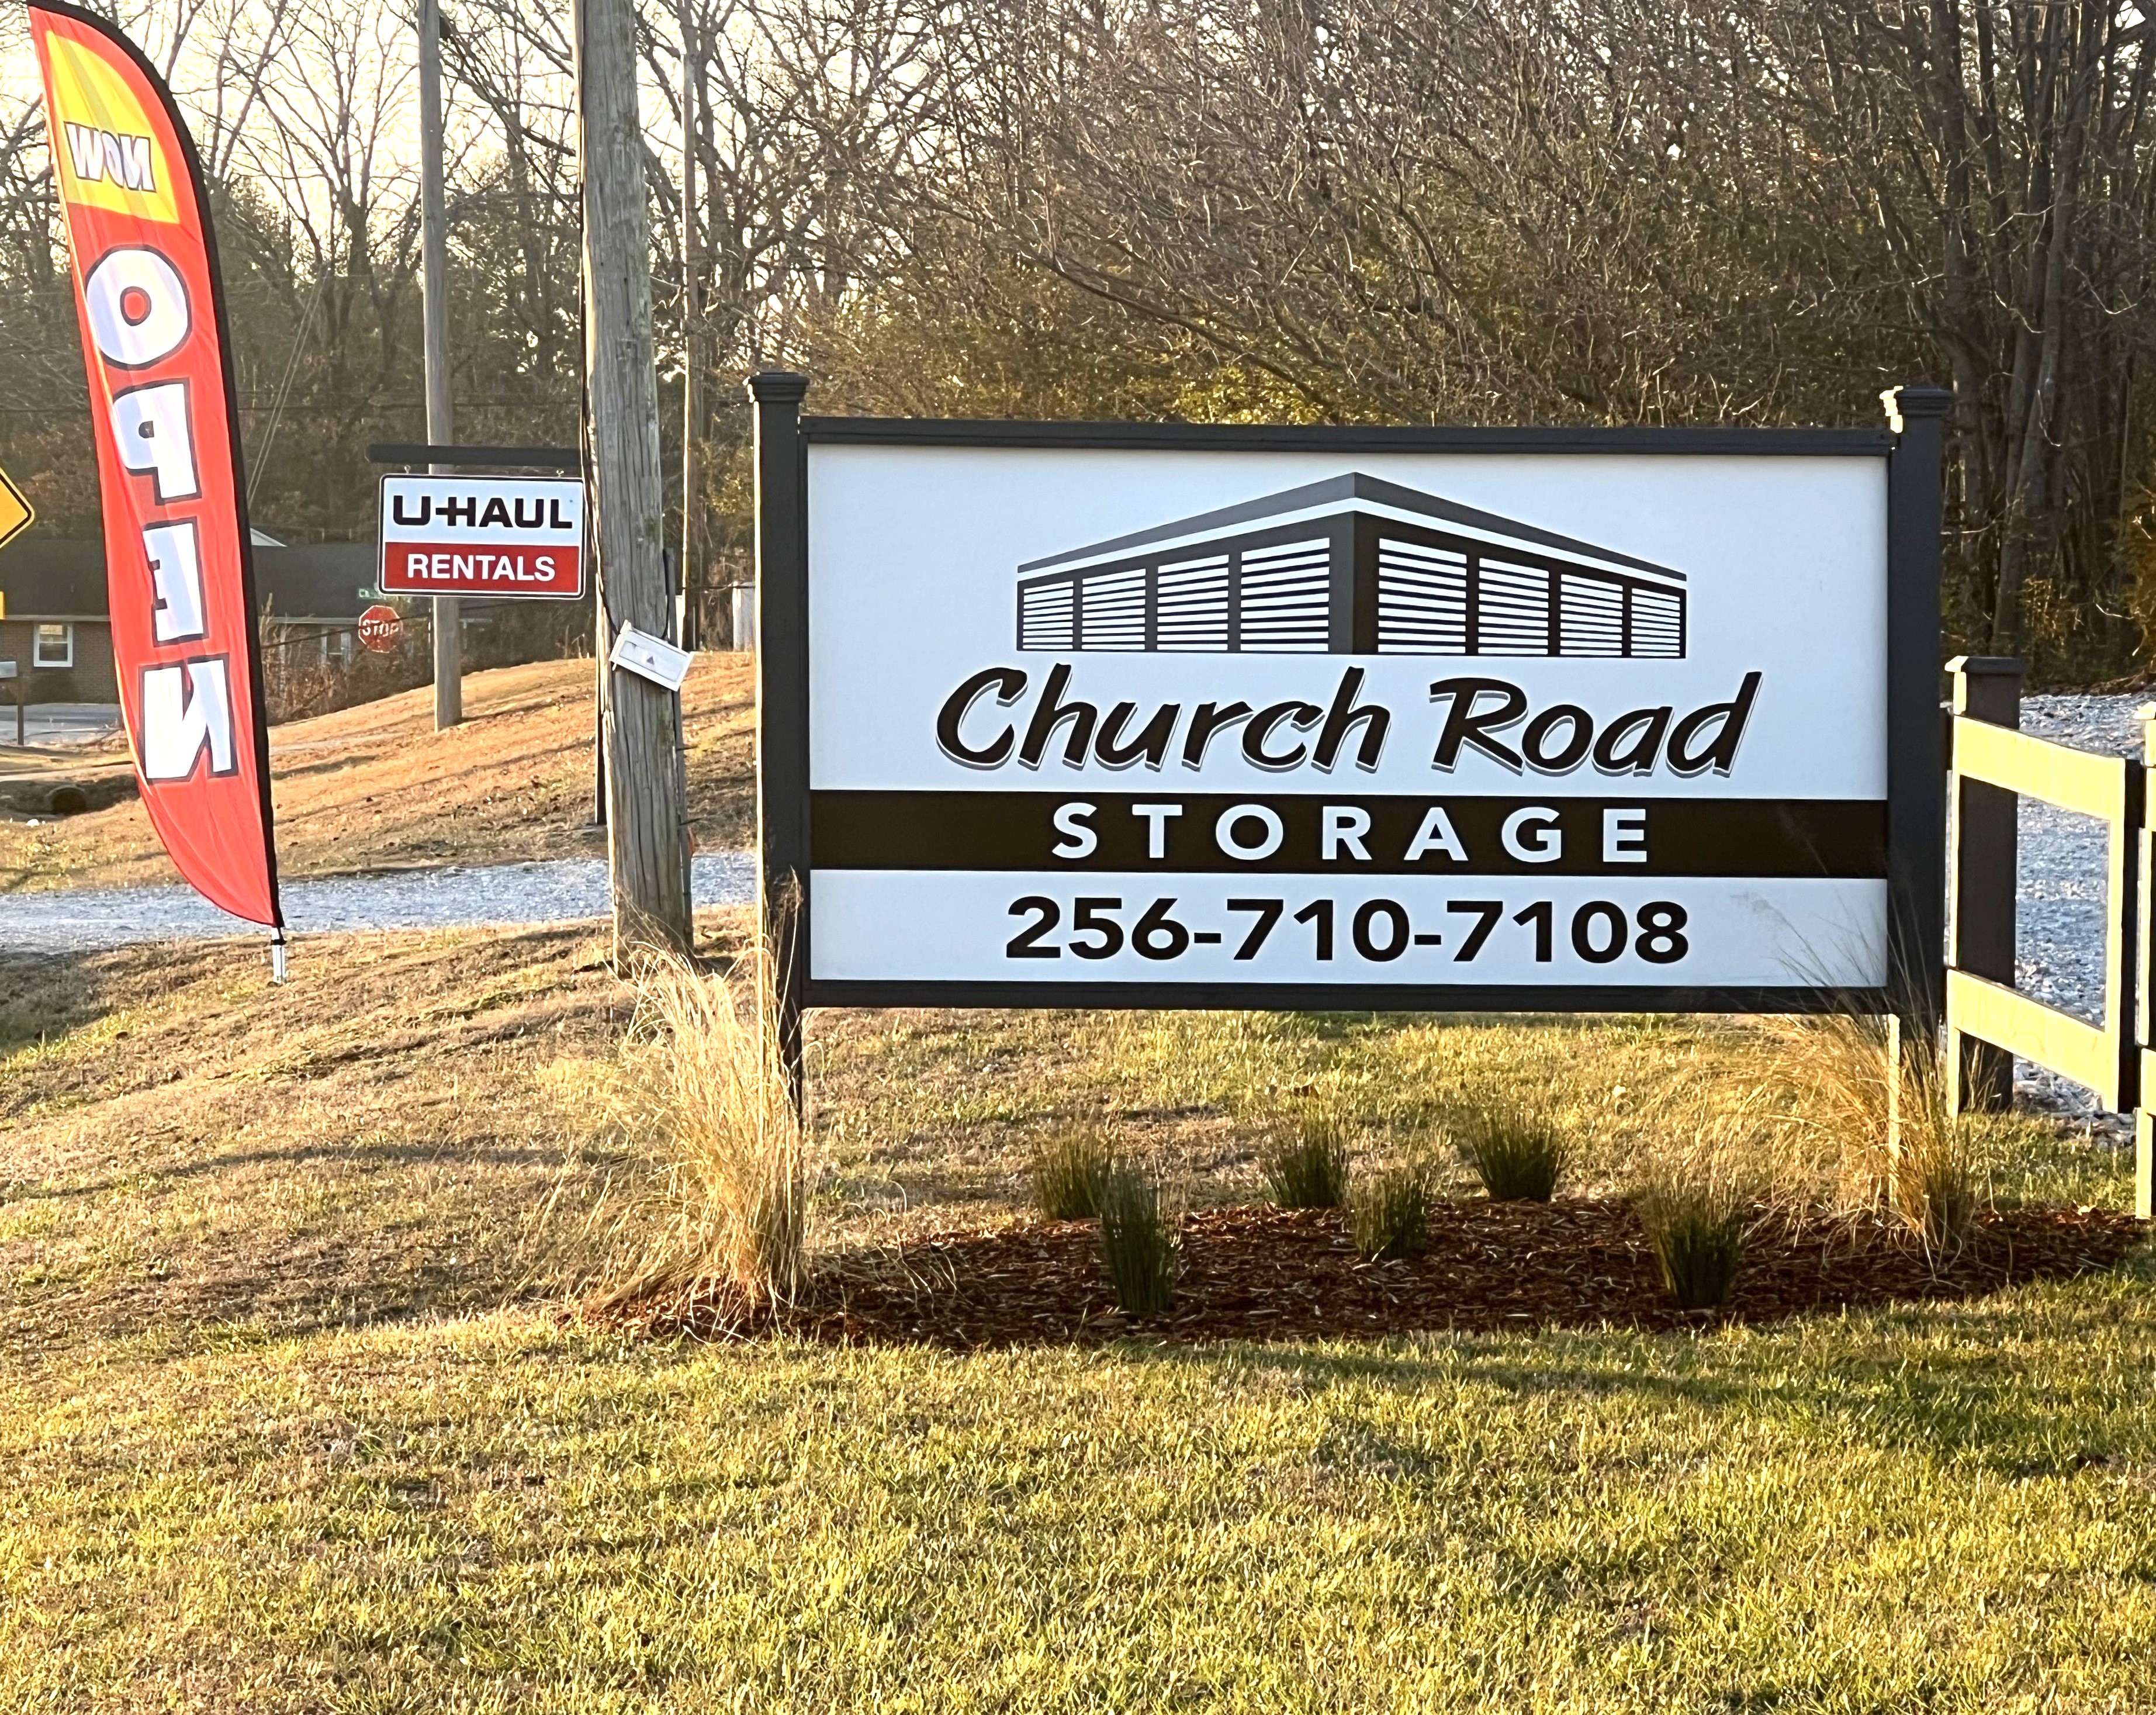 WELCOME TO CHURCH ROAD STORAGE